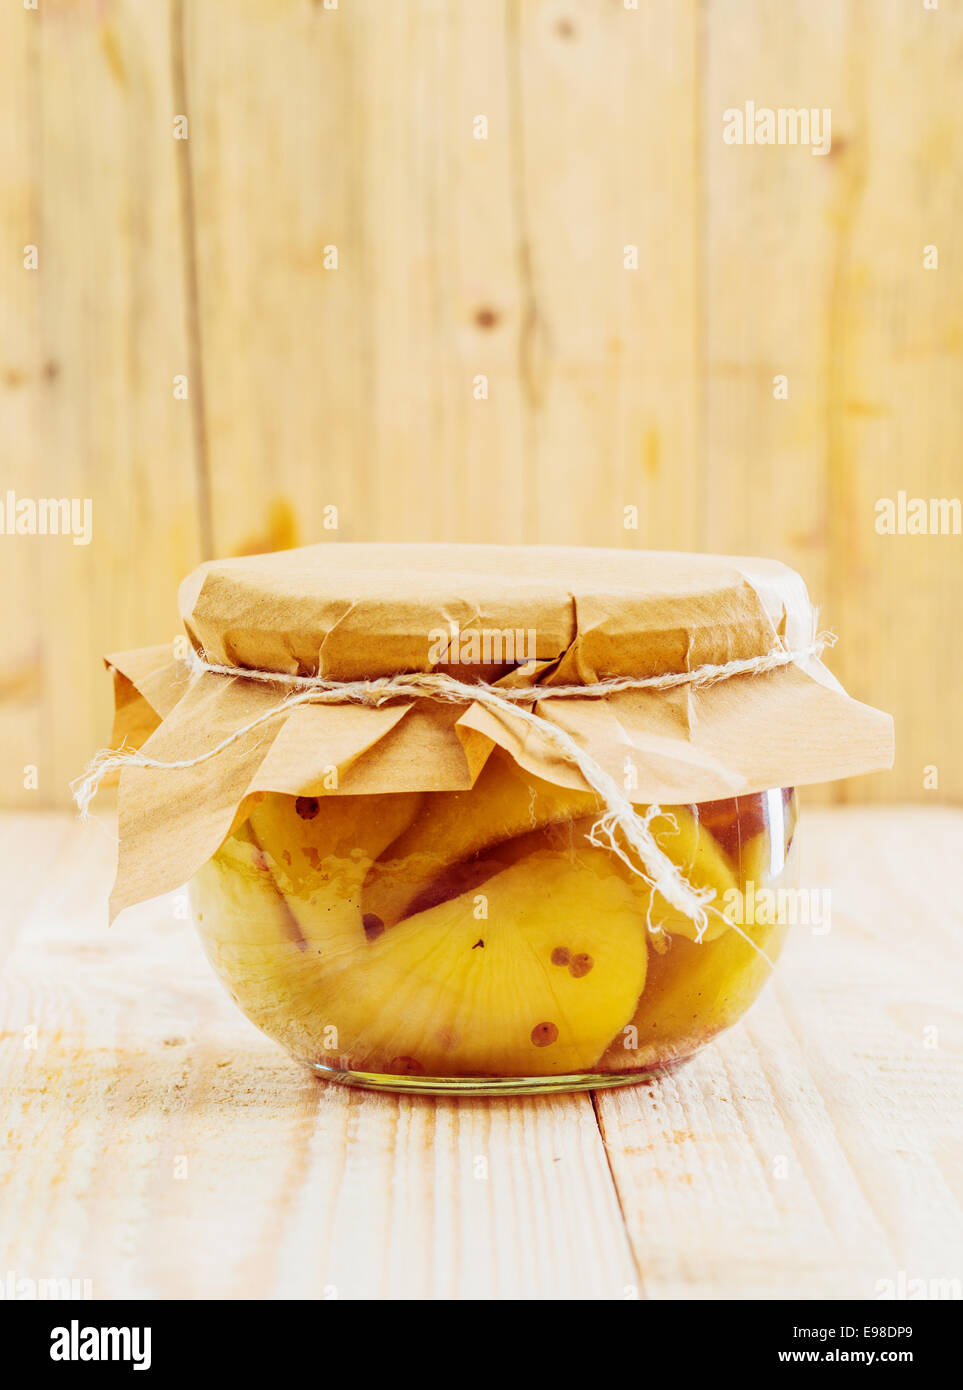 Speciality gourmet confection of preserved pears and vanilla tied off with a piece of rustic brown paper and string in a wooden Stock Photo